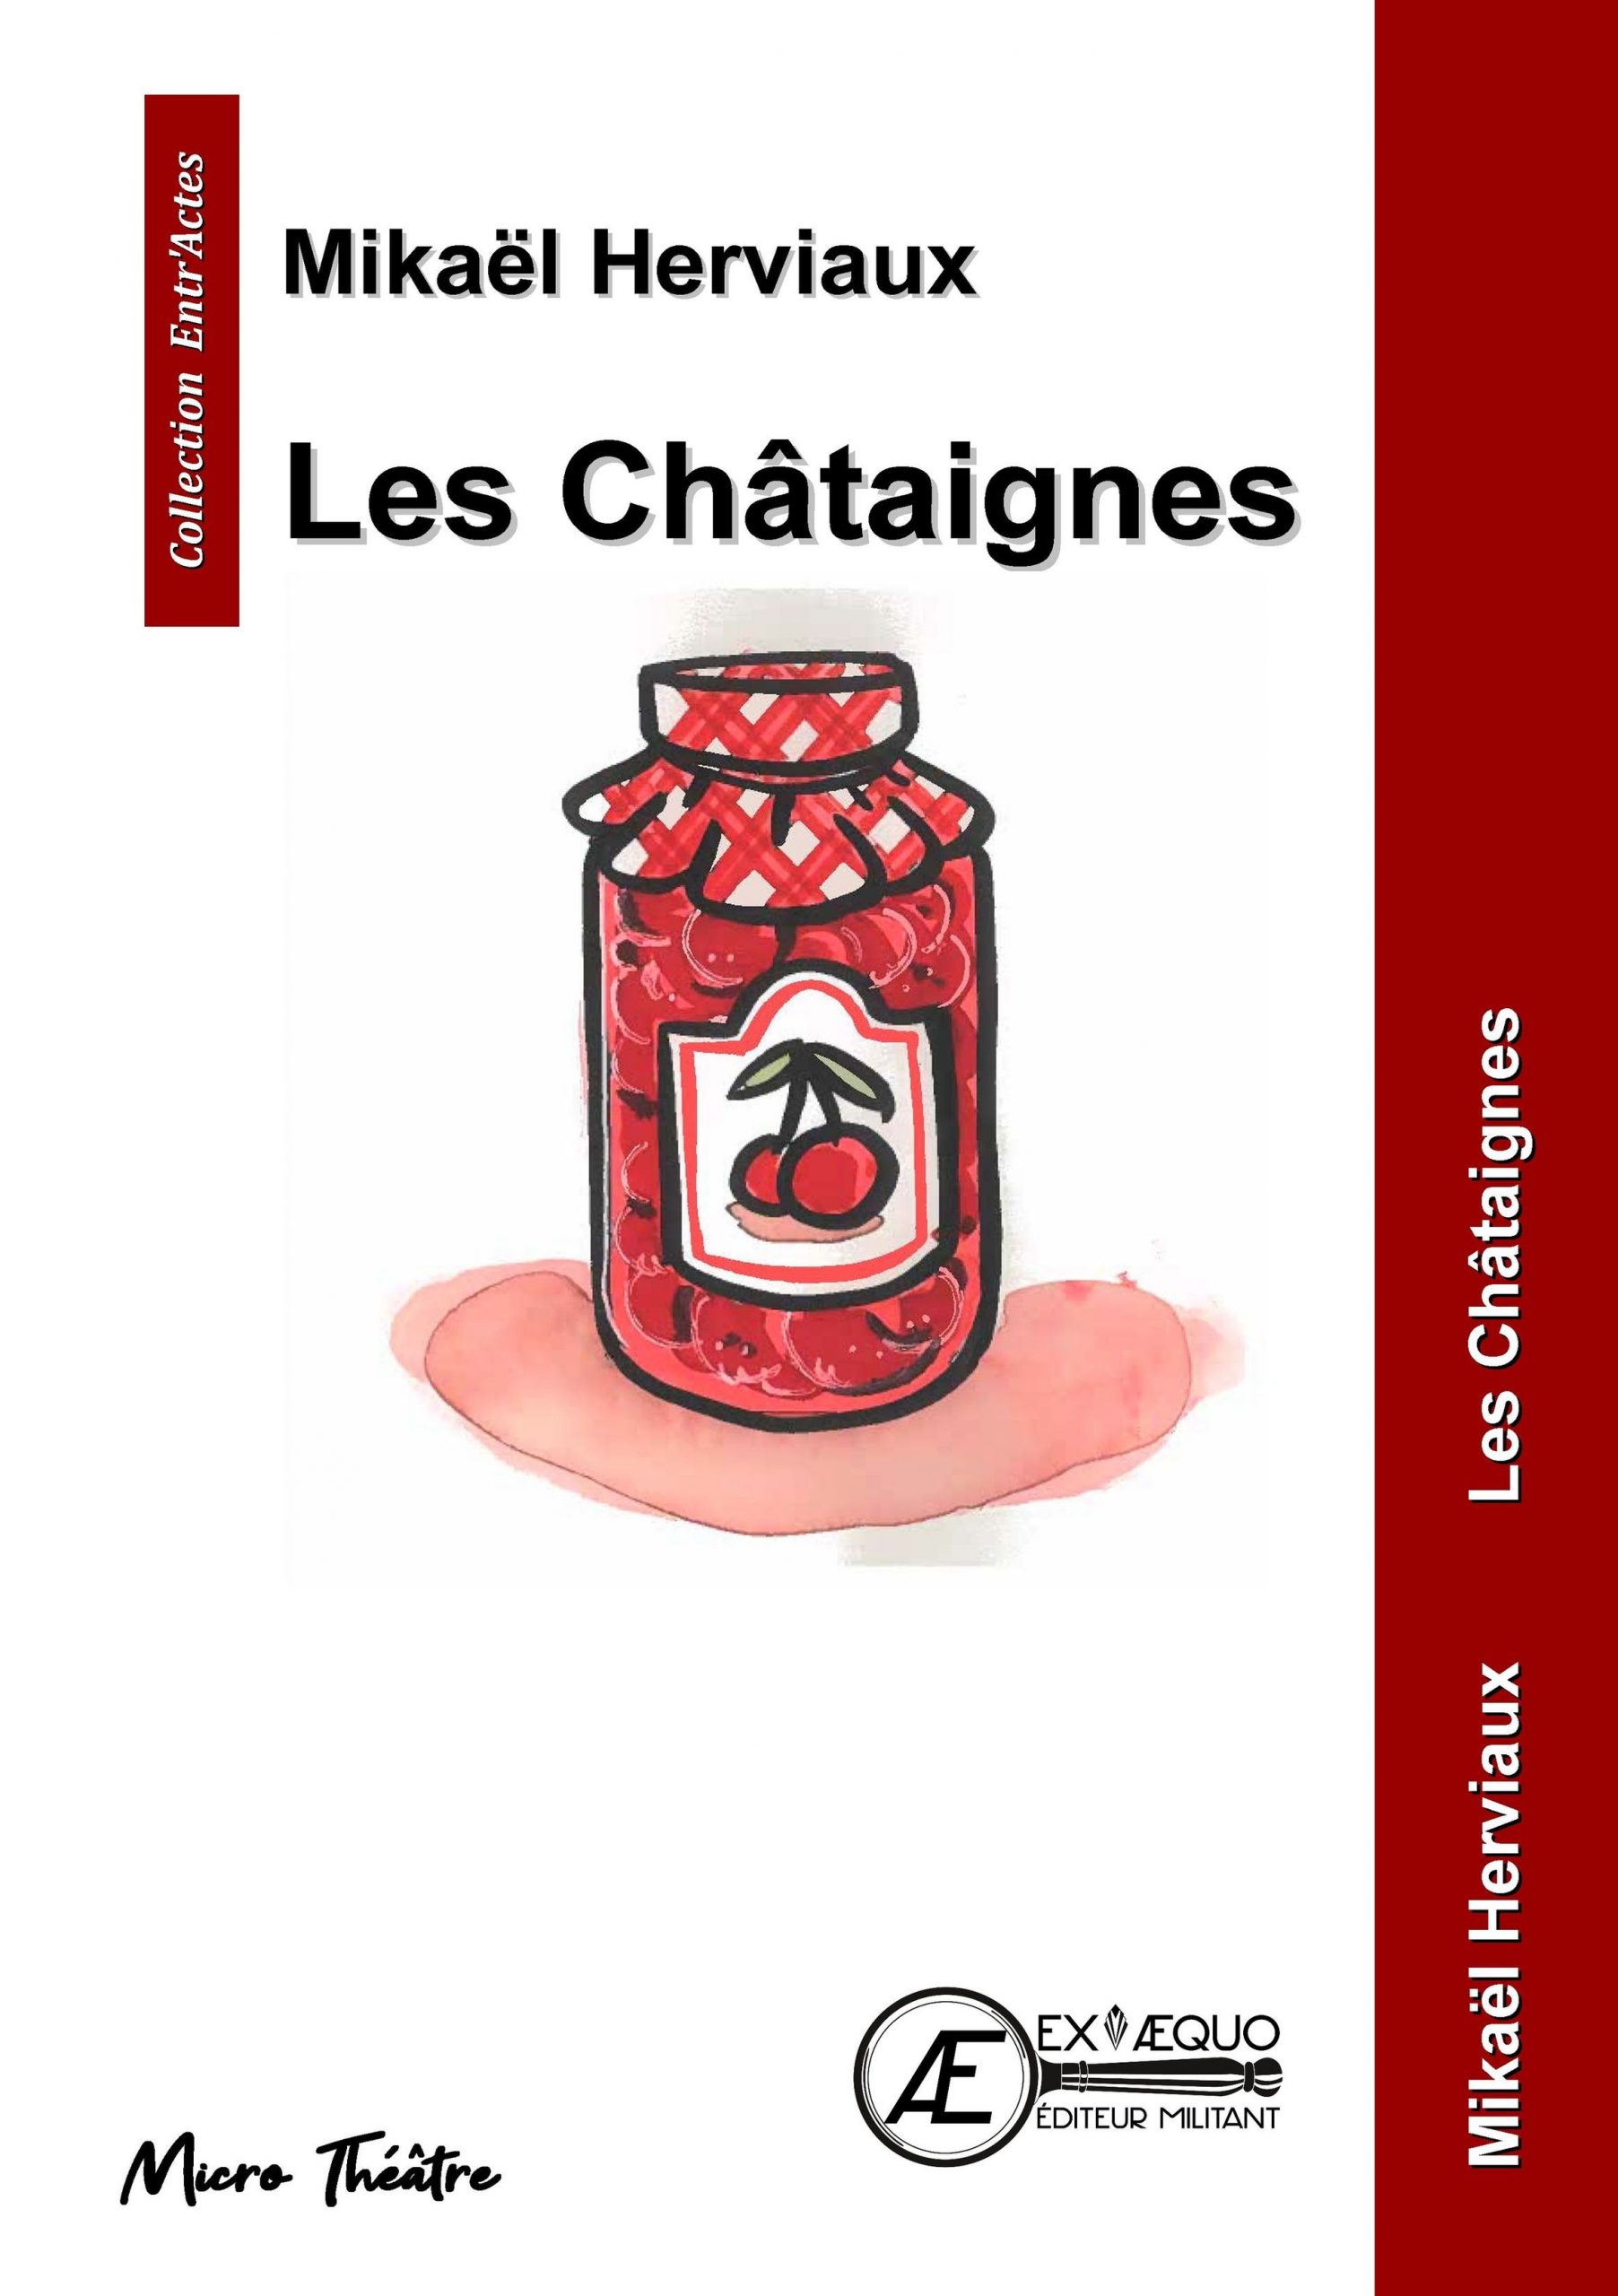 You are currently viewing Les Châtaignes